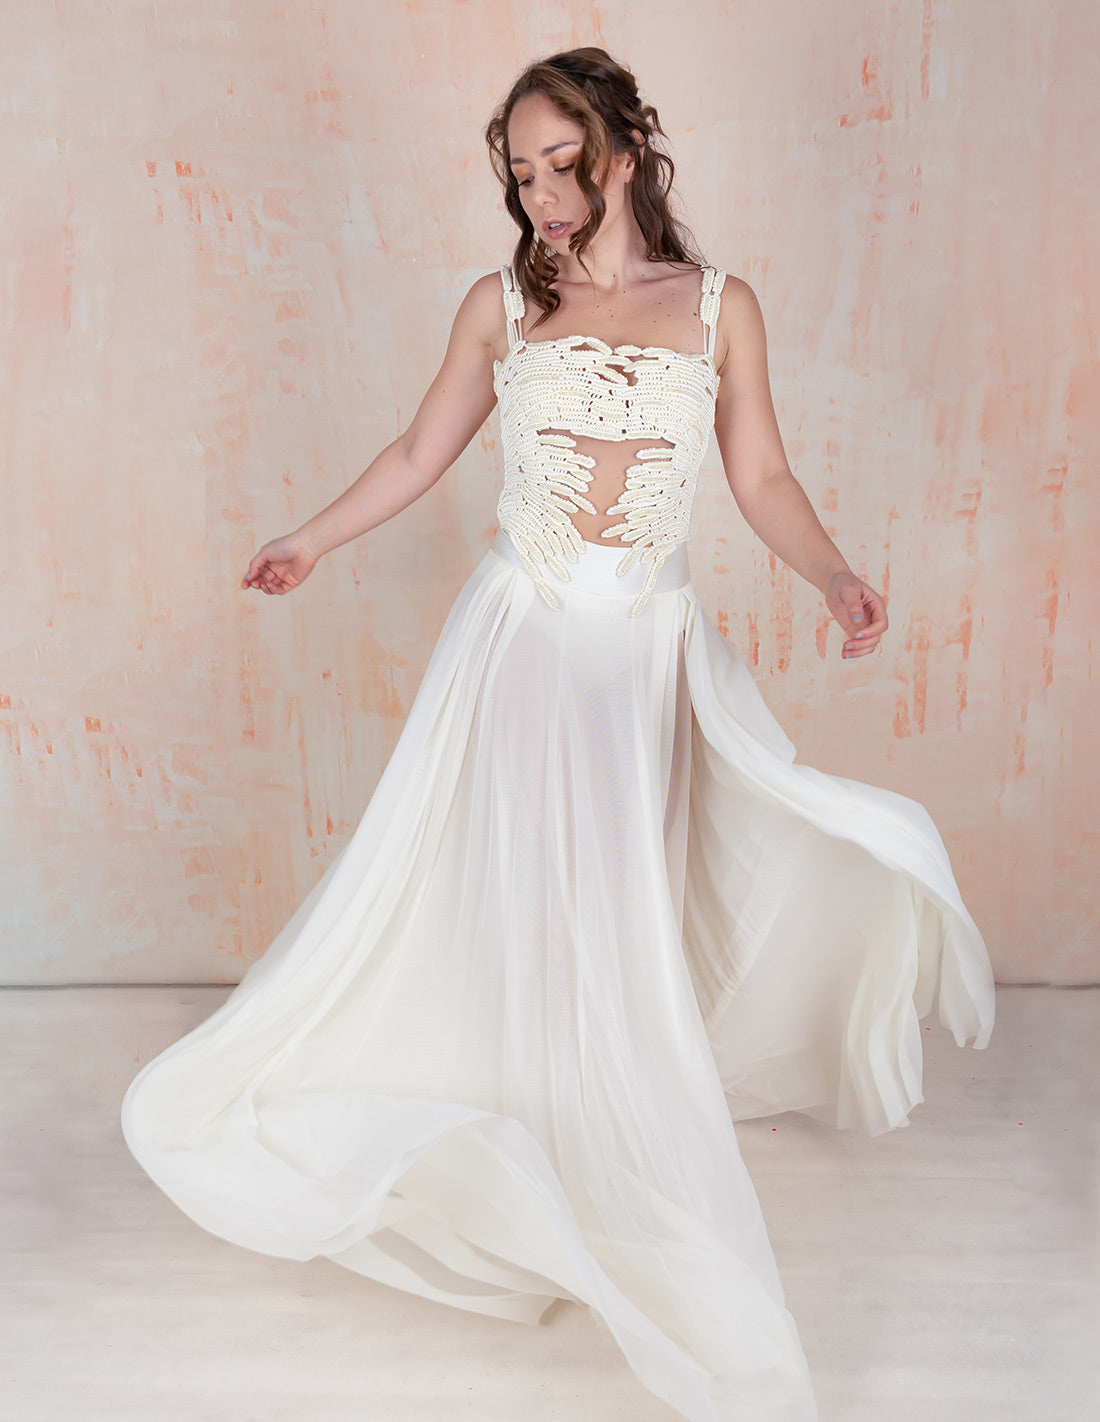 Divine Glow Dress Ivory. Dress With Hand Woven Macramé In Ivory. Entreaguas